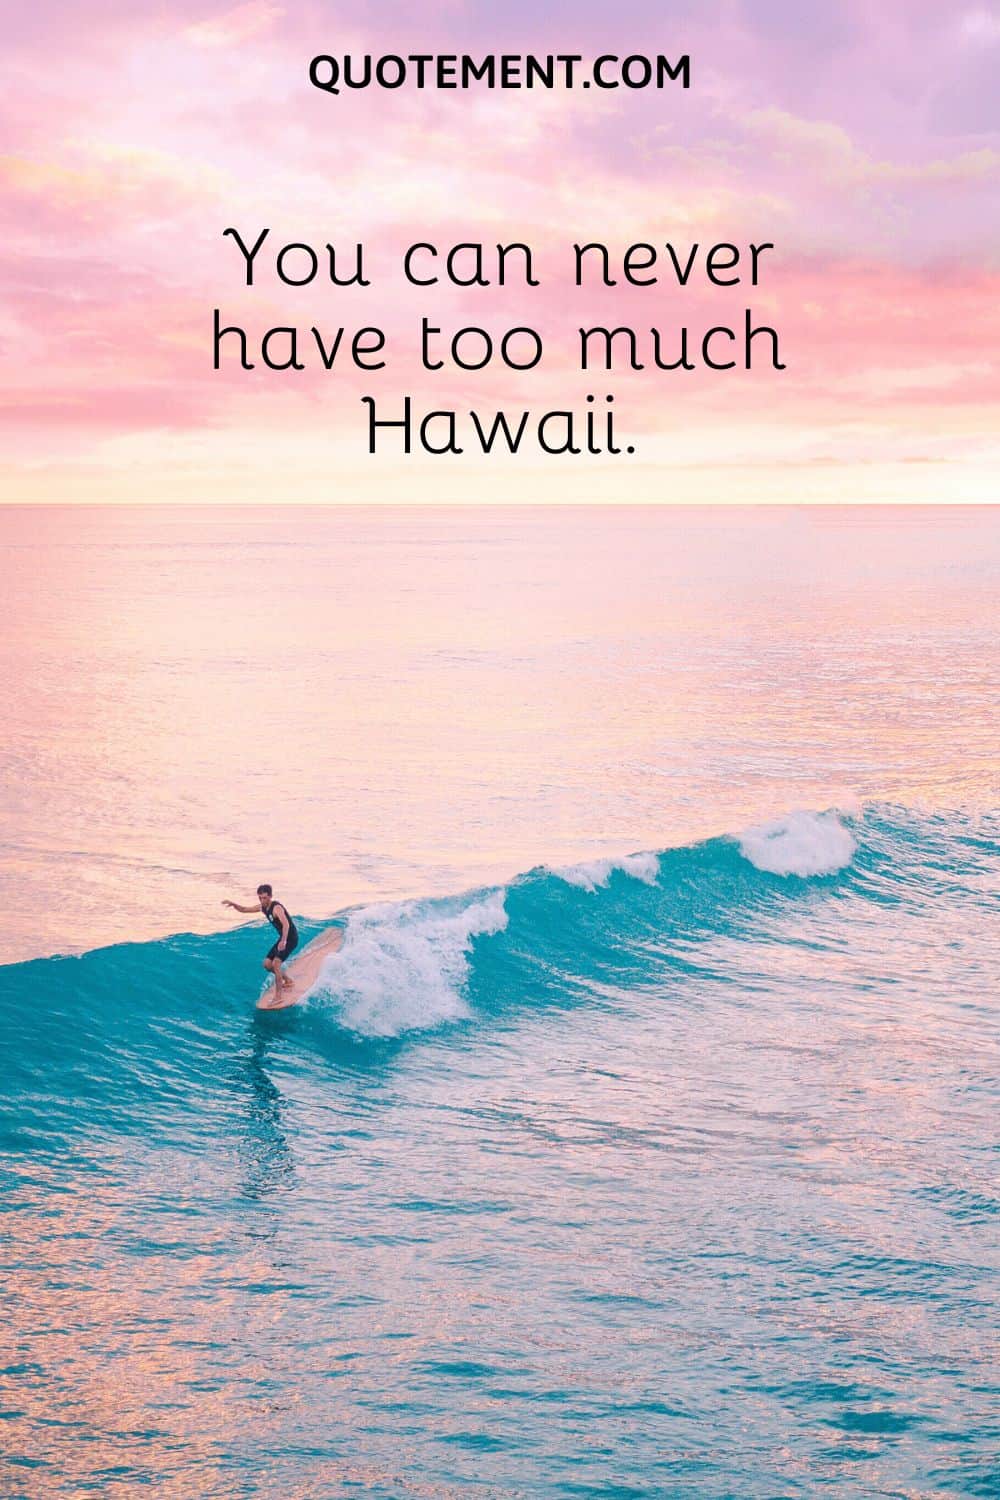 You can never have too much Hawaii.